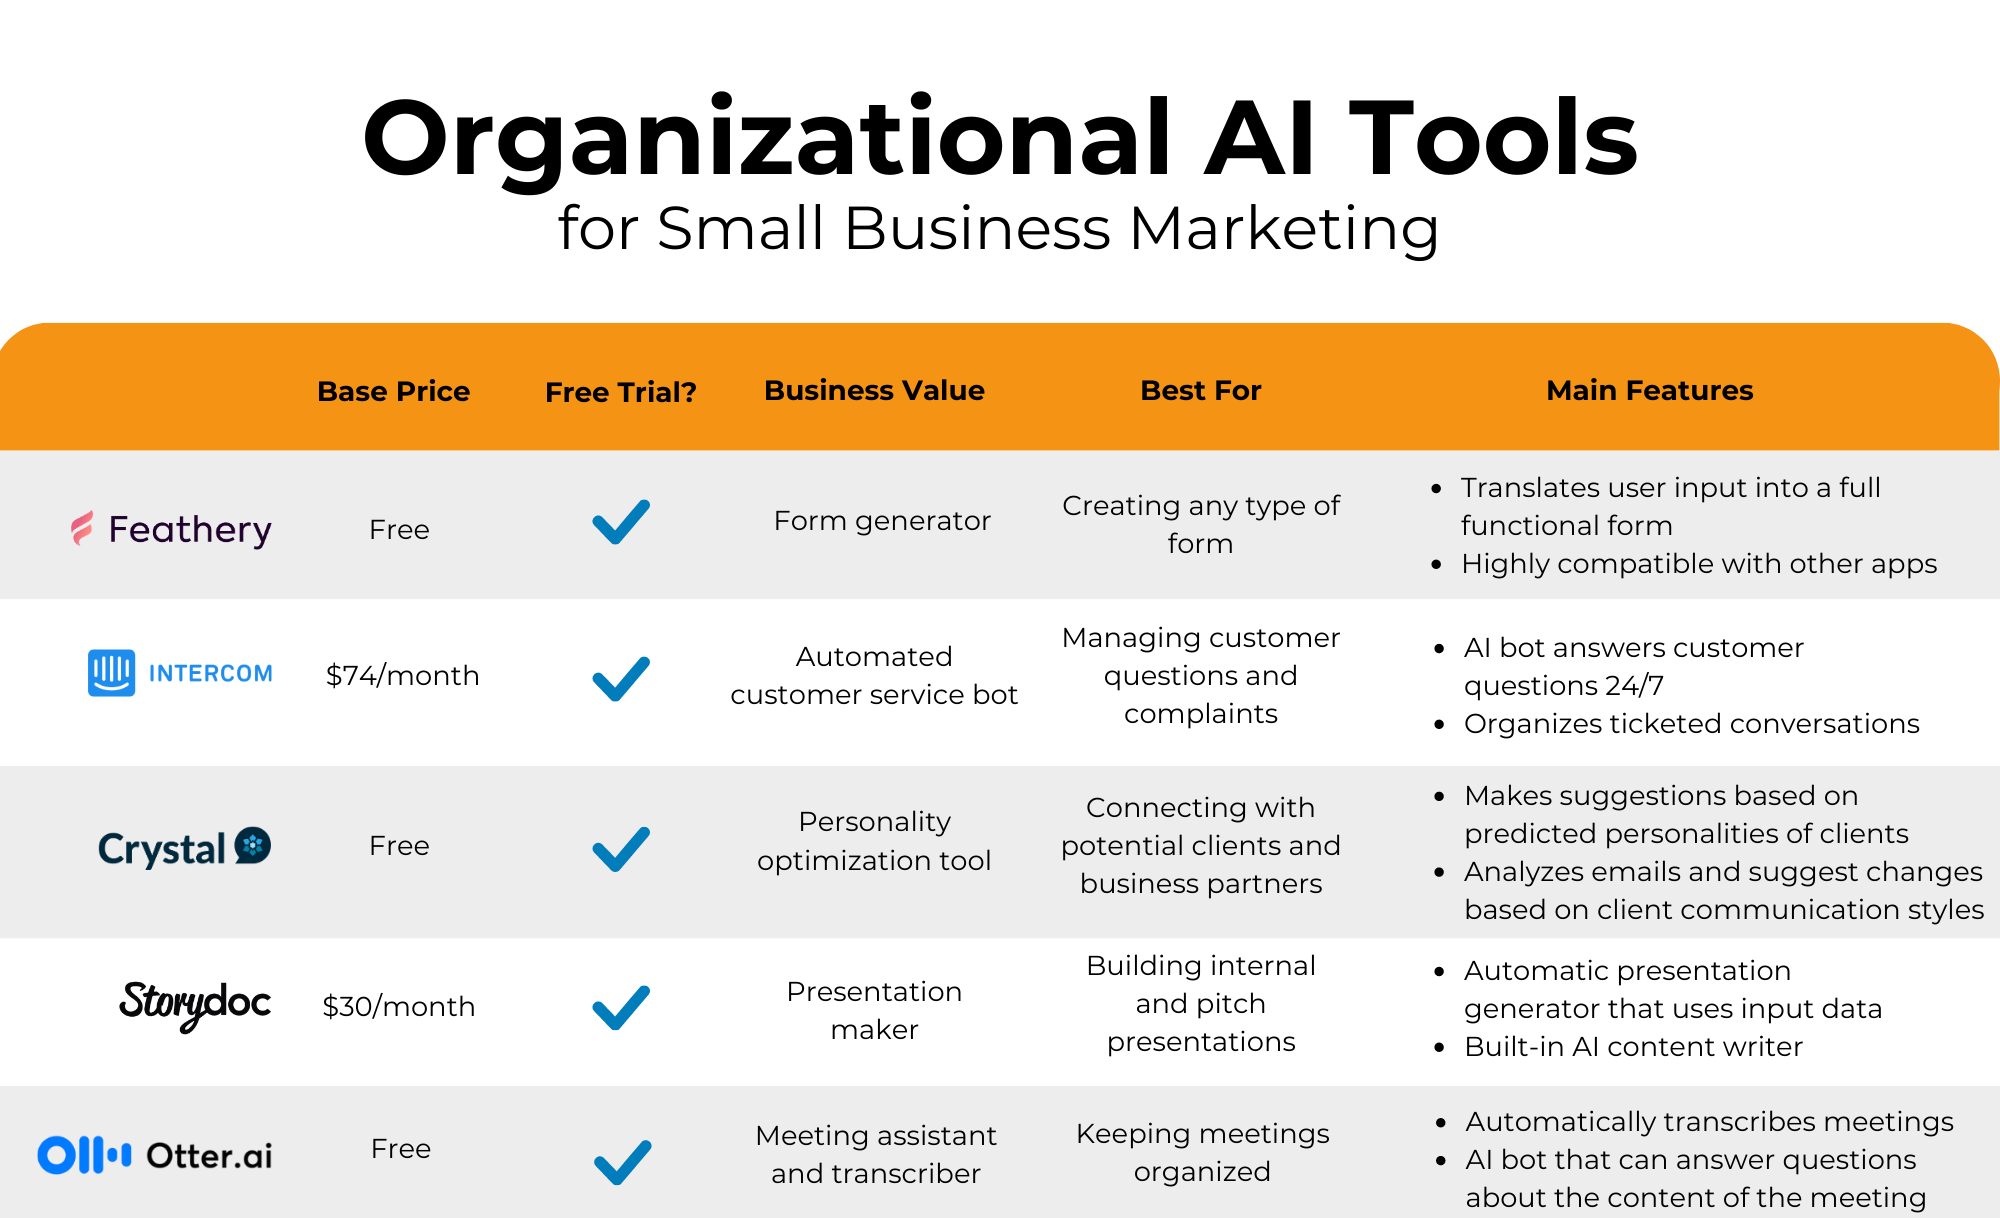 organizational ai tools in a chart format visual aid for small businesses